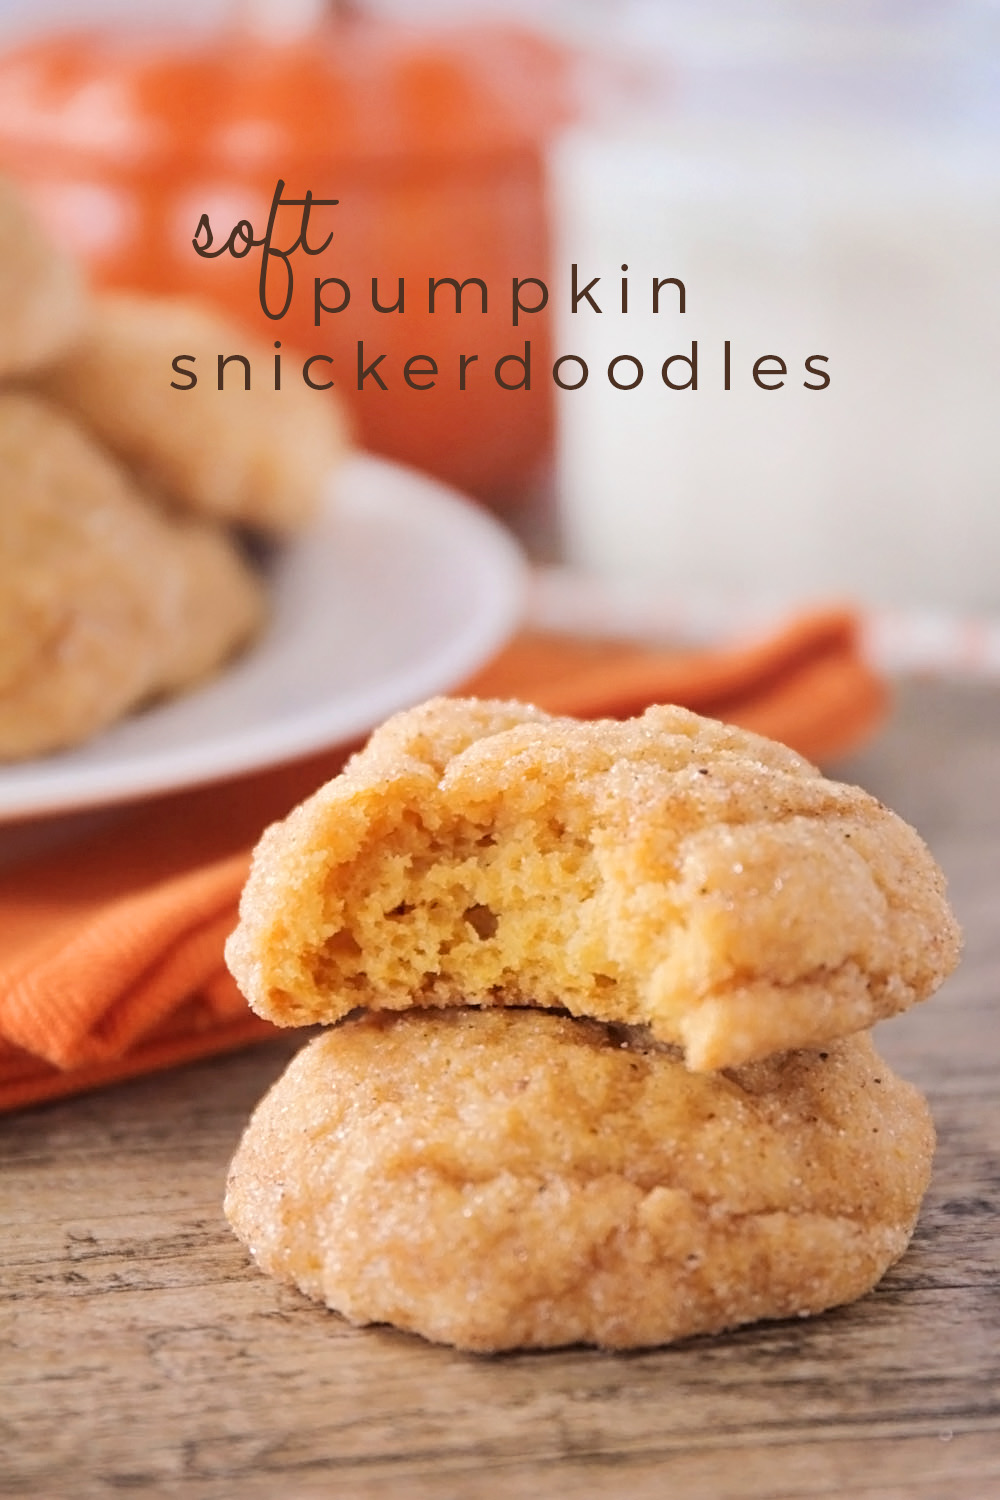 Soft pumpkin snickerdoodles - these soft and delicious cookies are full of fall flavor!